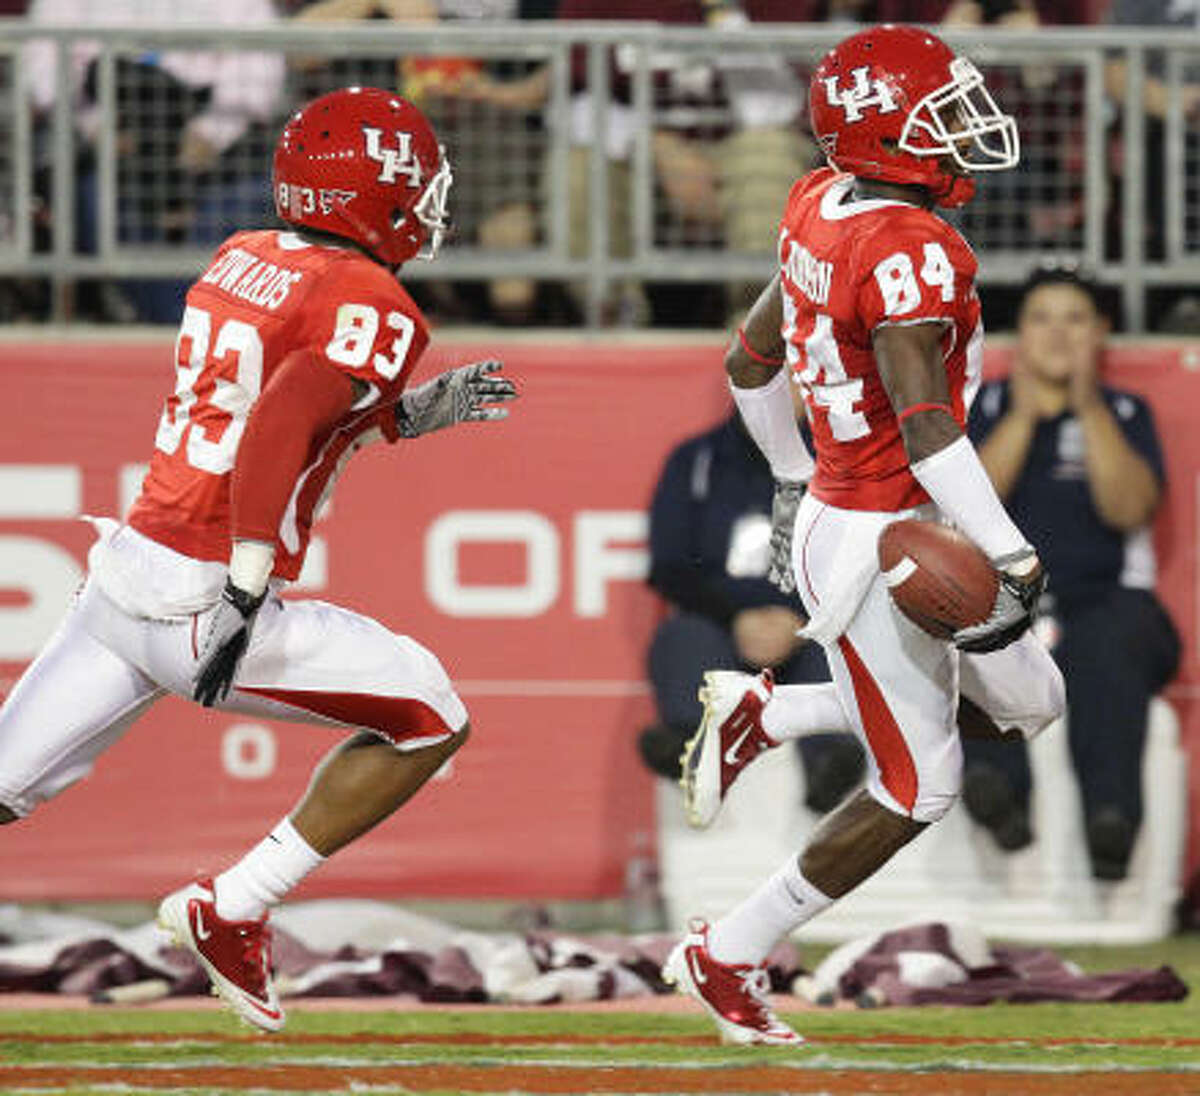 Oct. 9: Mississippi State 47, UH 24 UH wide receiver Kierrie Johnson (84) scores the first touchdown of the game after a successful opening drive in the first quarter. The Cougars, however, wouldn't score another touchdown until the fourth quarter.